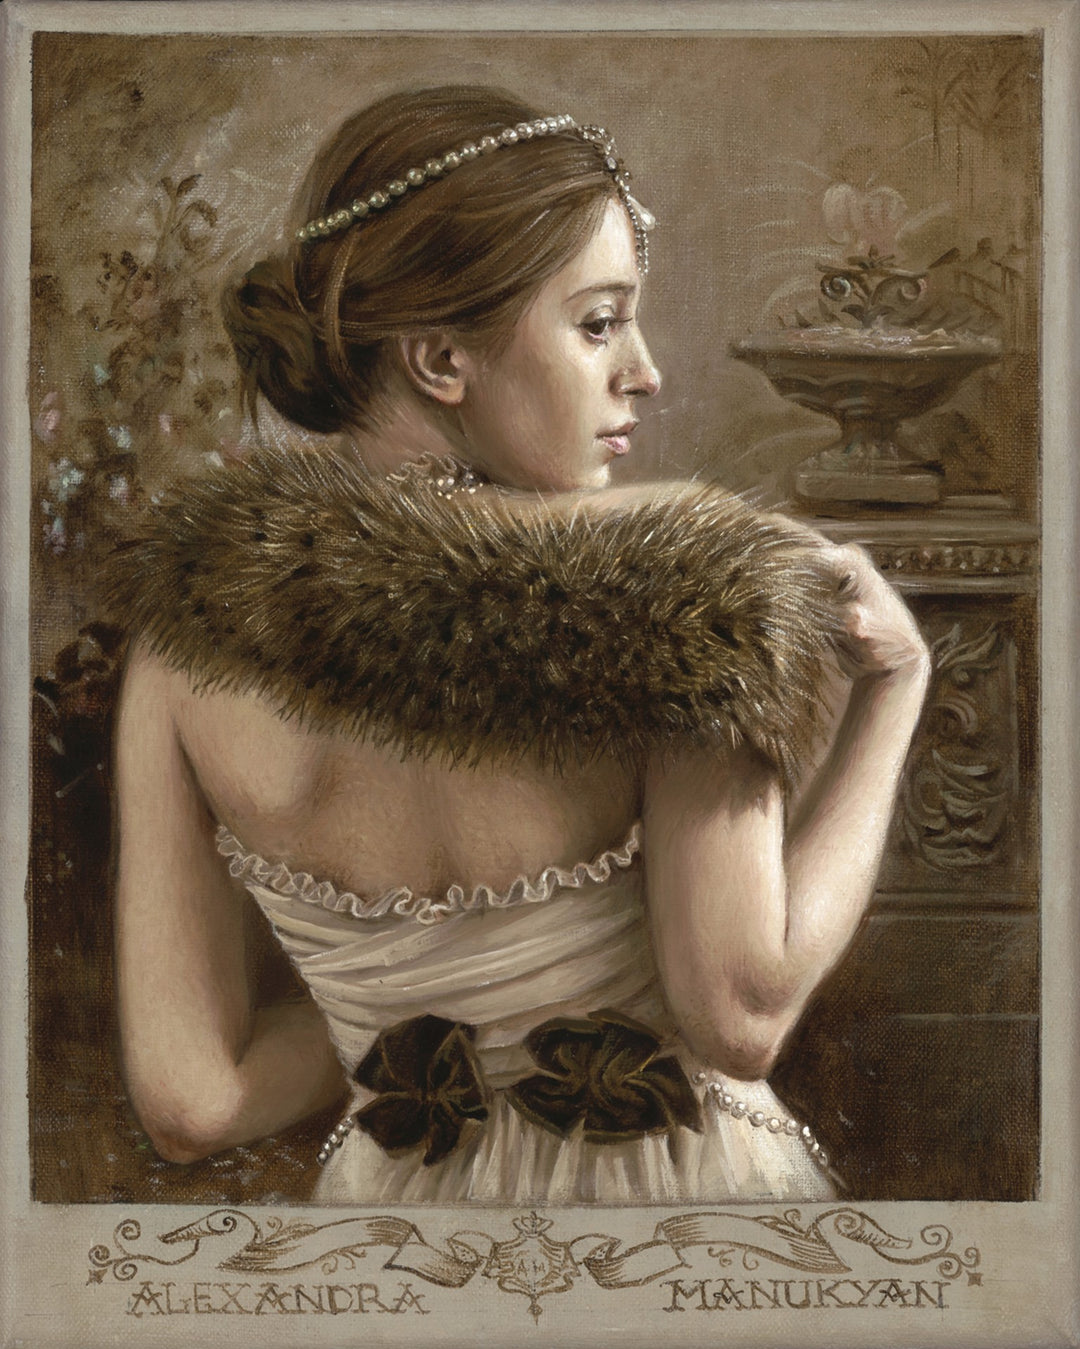 A painting of a woman wearing a fur collar, titled "Alexandra Manukyan - Nameless Grace", by artist Alexandra Manukyan. This stunning work of art is rendered in oil on Belgian linen.